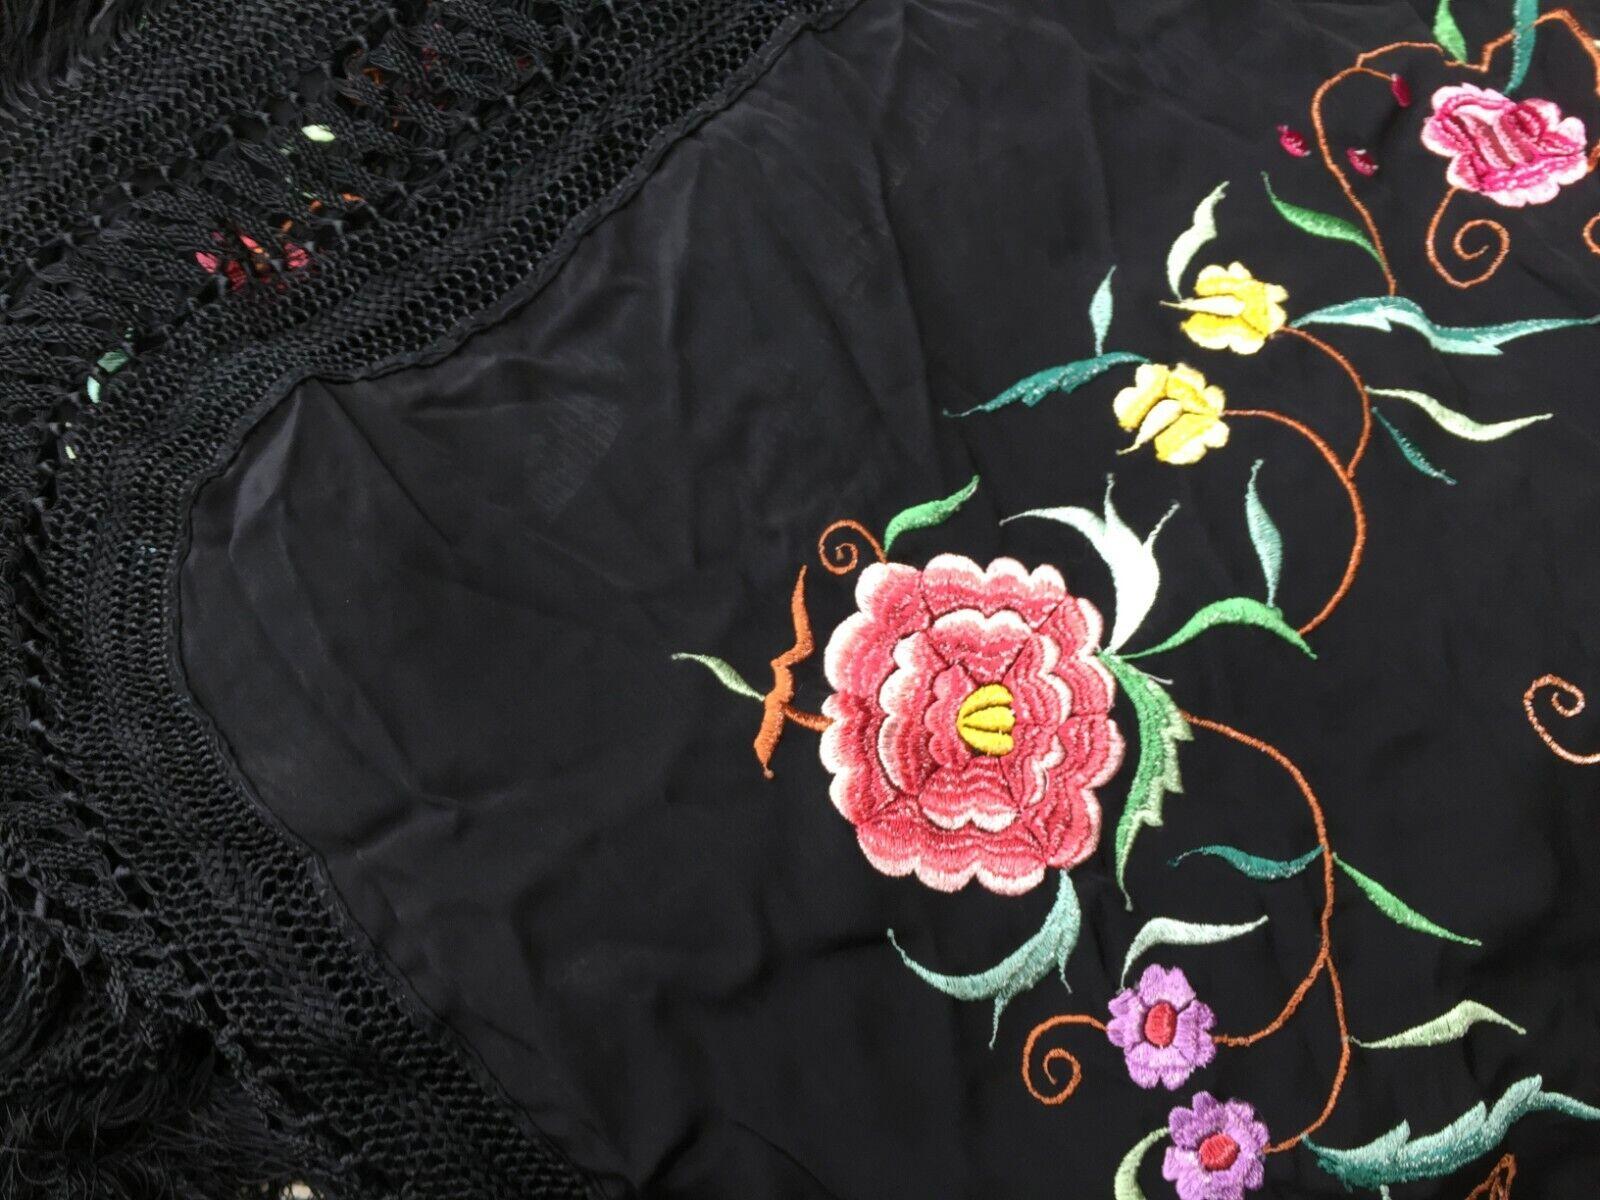 Handmade Vintage Chinese Silk Shawl:

Design and Colors:
This square-shaped shawl is a testament to Chinese craftsmanship.
The dominant color is a rich black, creating a dramatic backdrop for the intricate silk embroideries.
The silk embroideries,